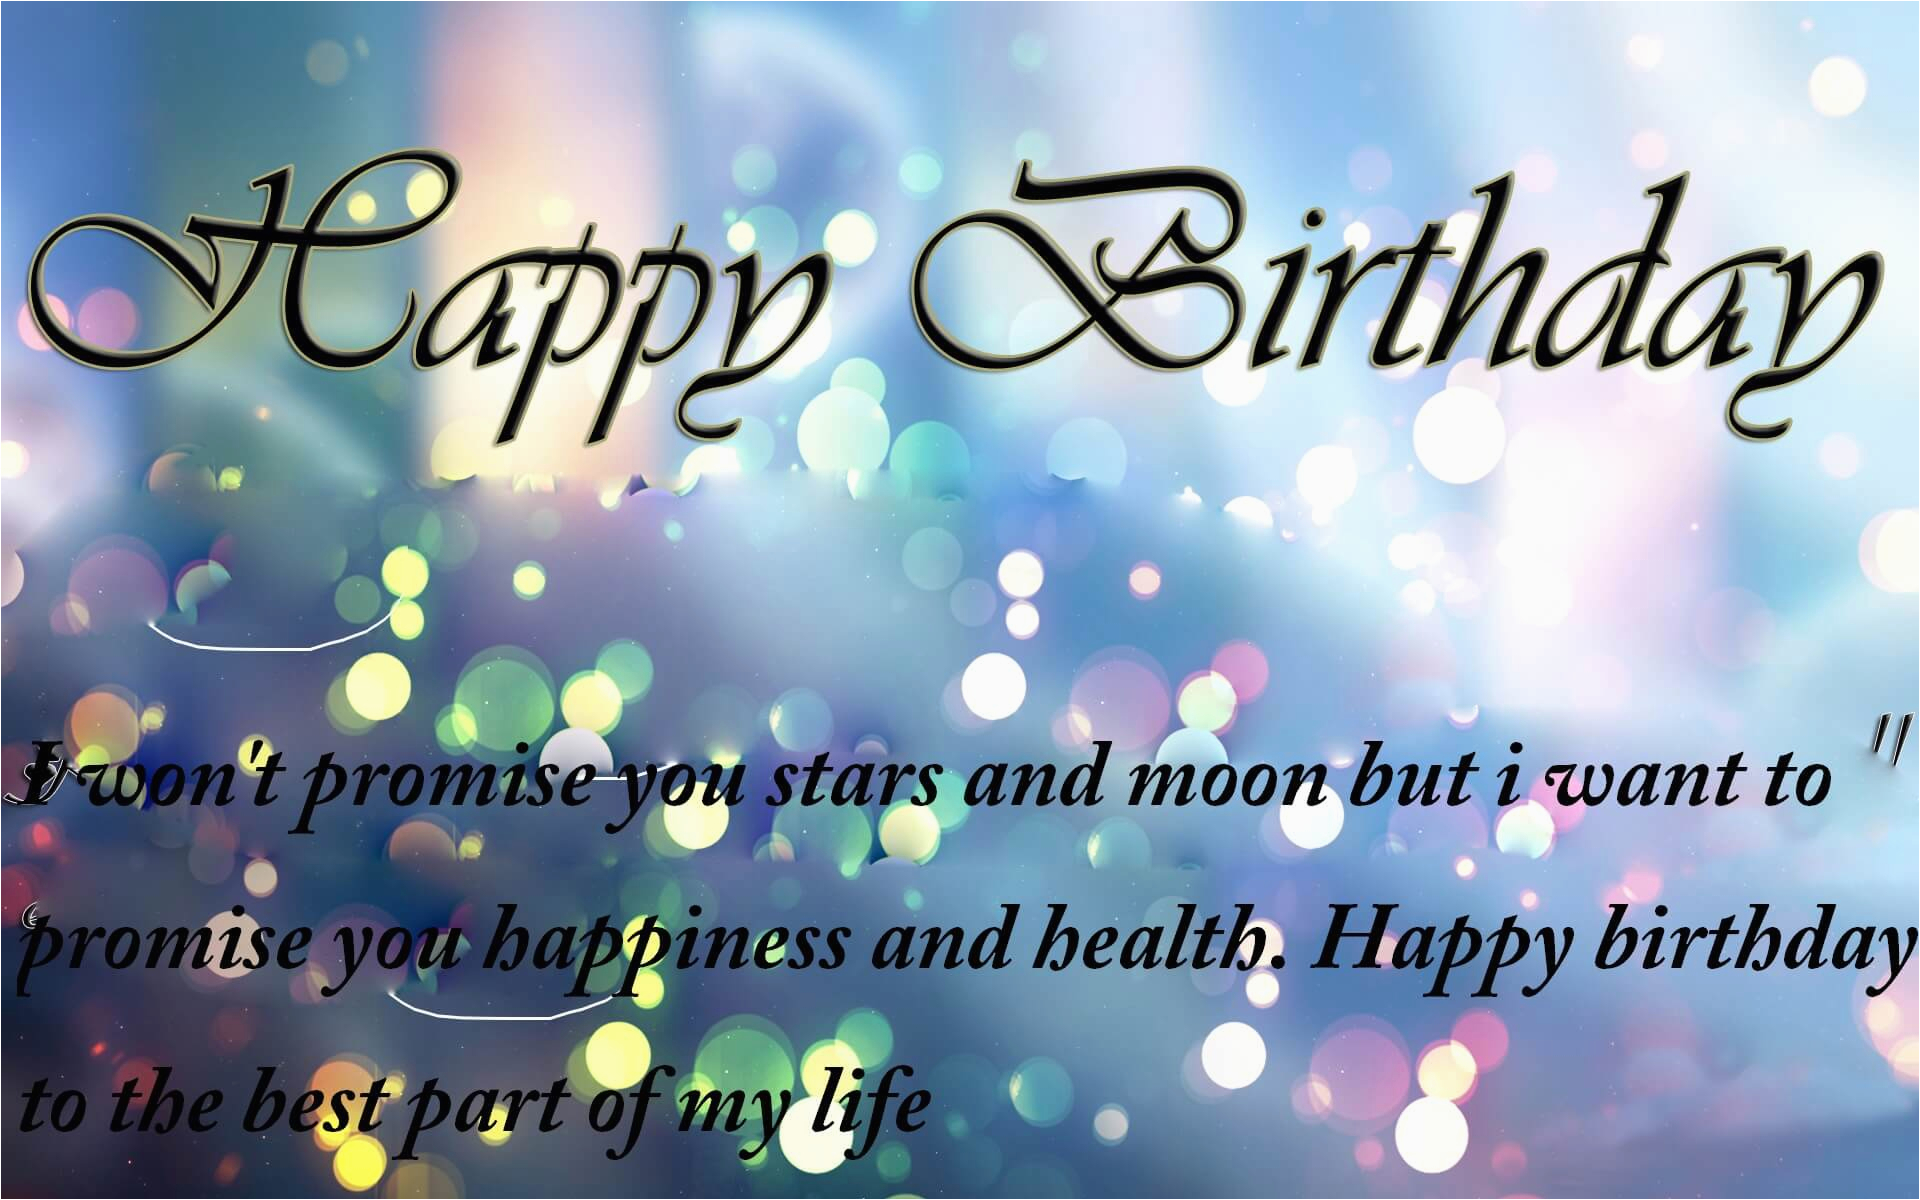 Happy Birthday and New Year Wishes Quotes top Birthday Wishes Images Greetings Cards and Gifs